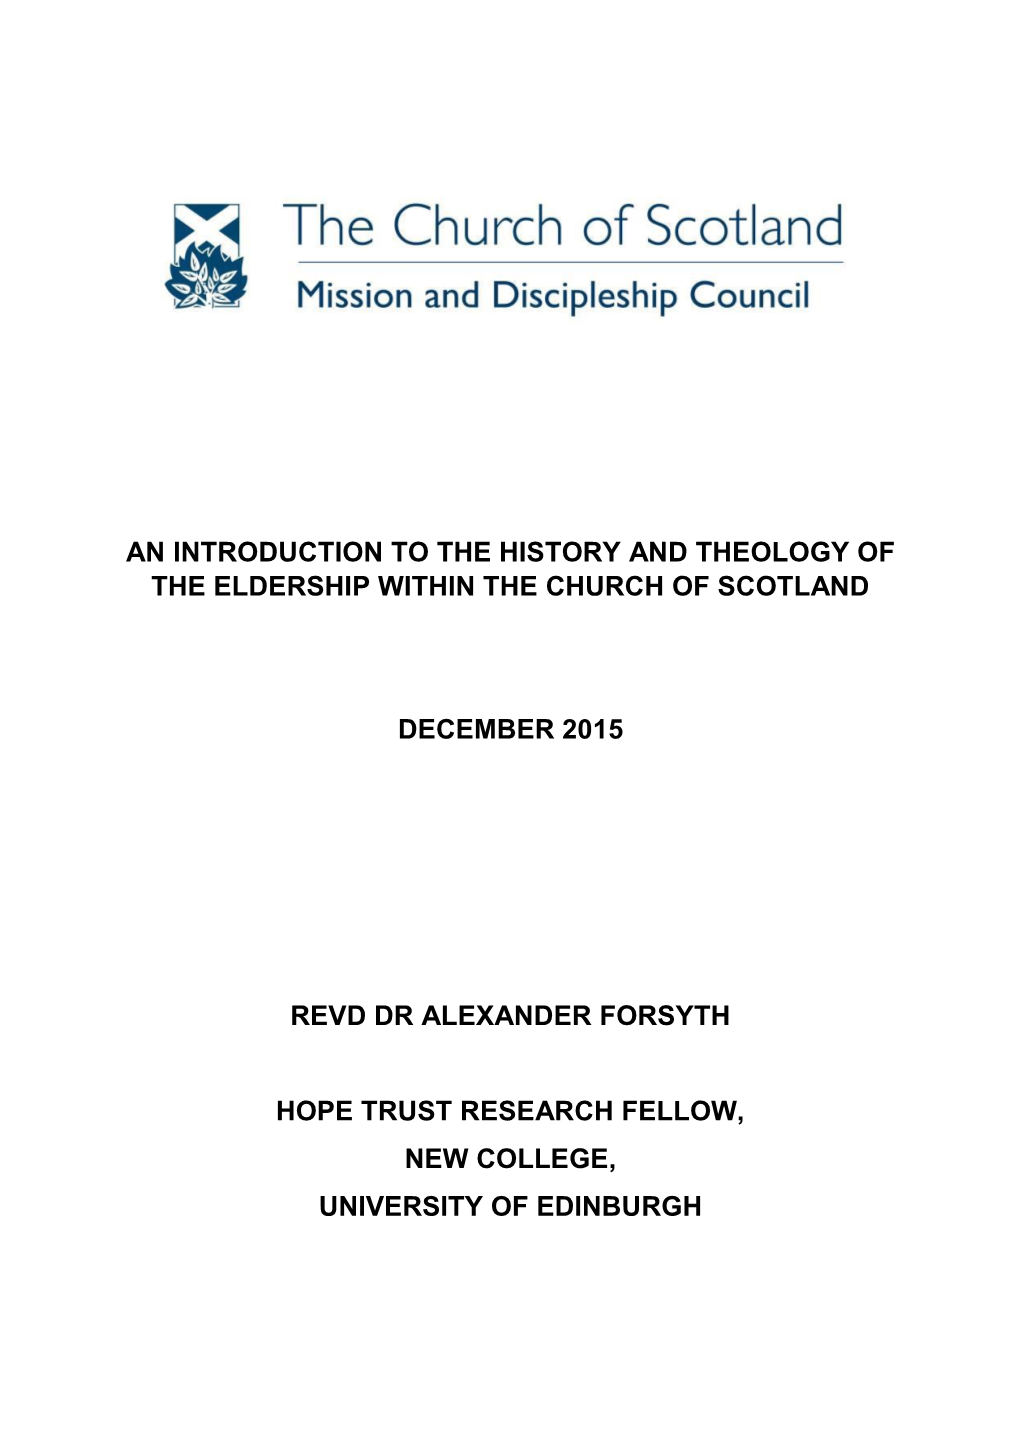 History and Theology of the Eldership Within the Church of Scotland